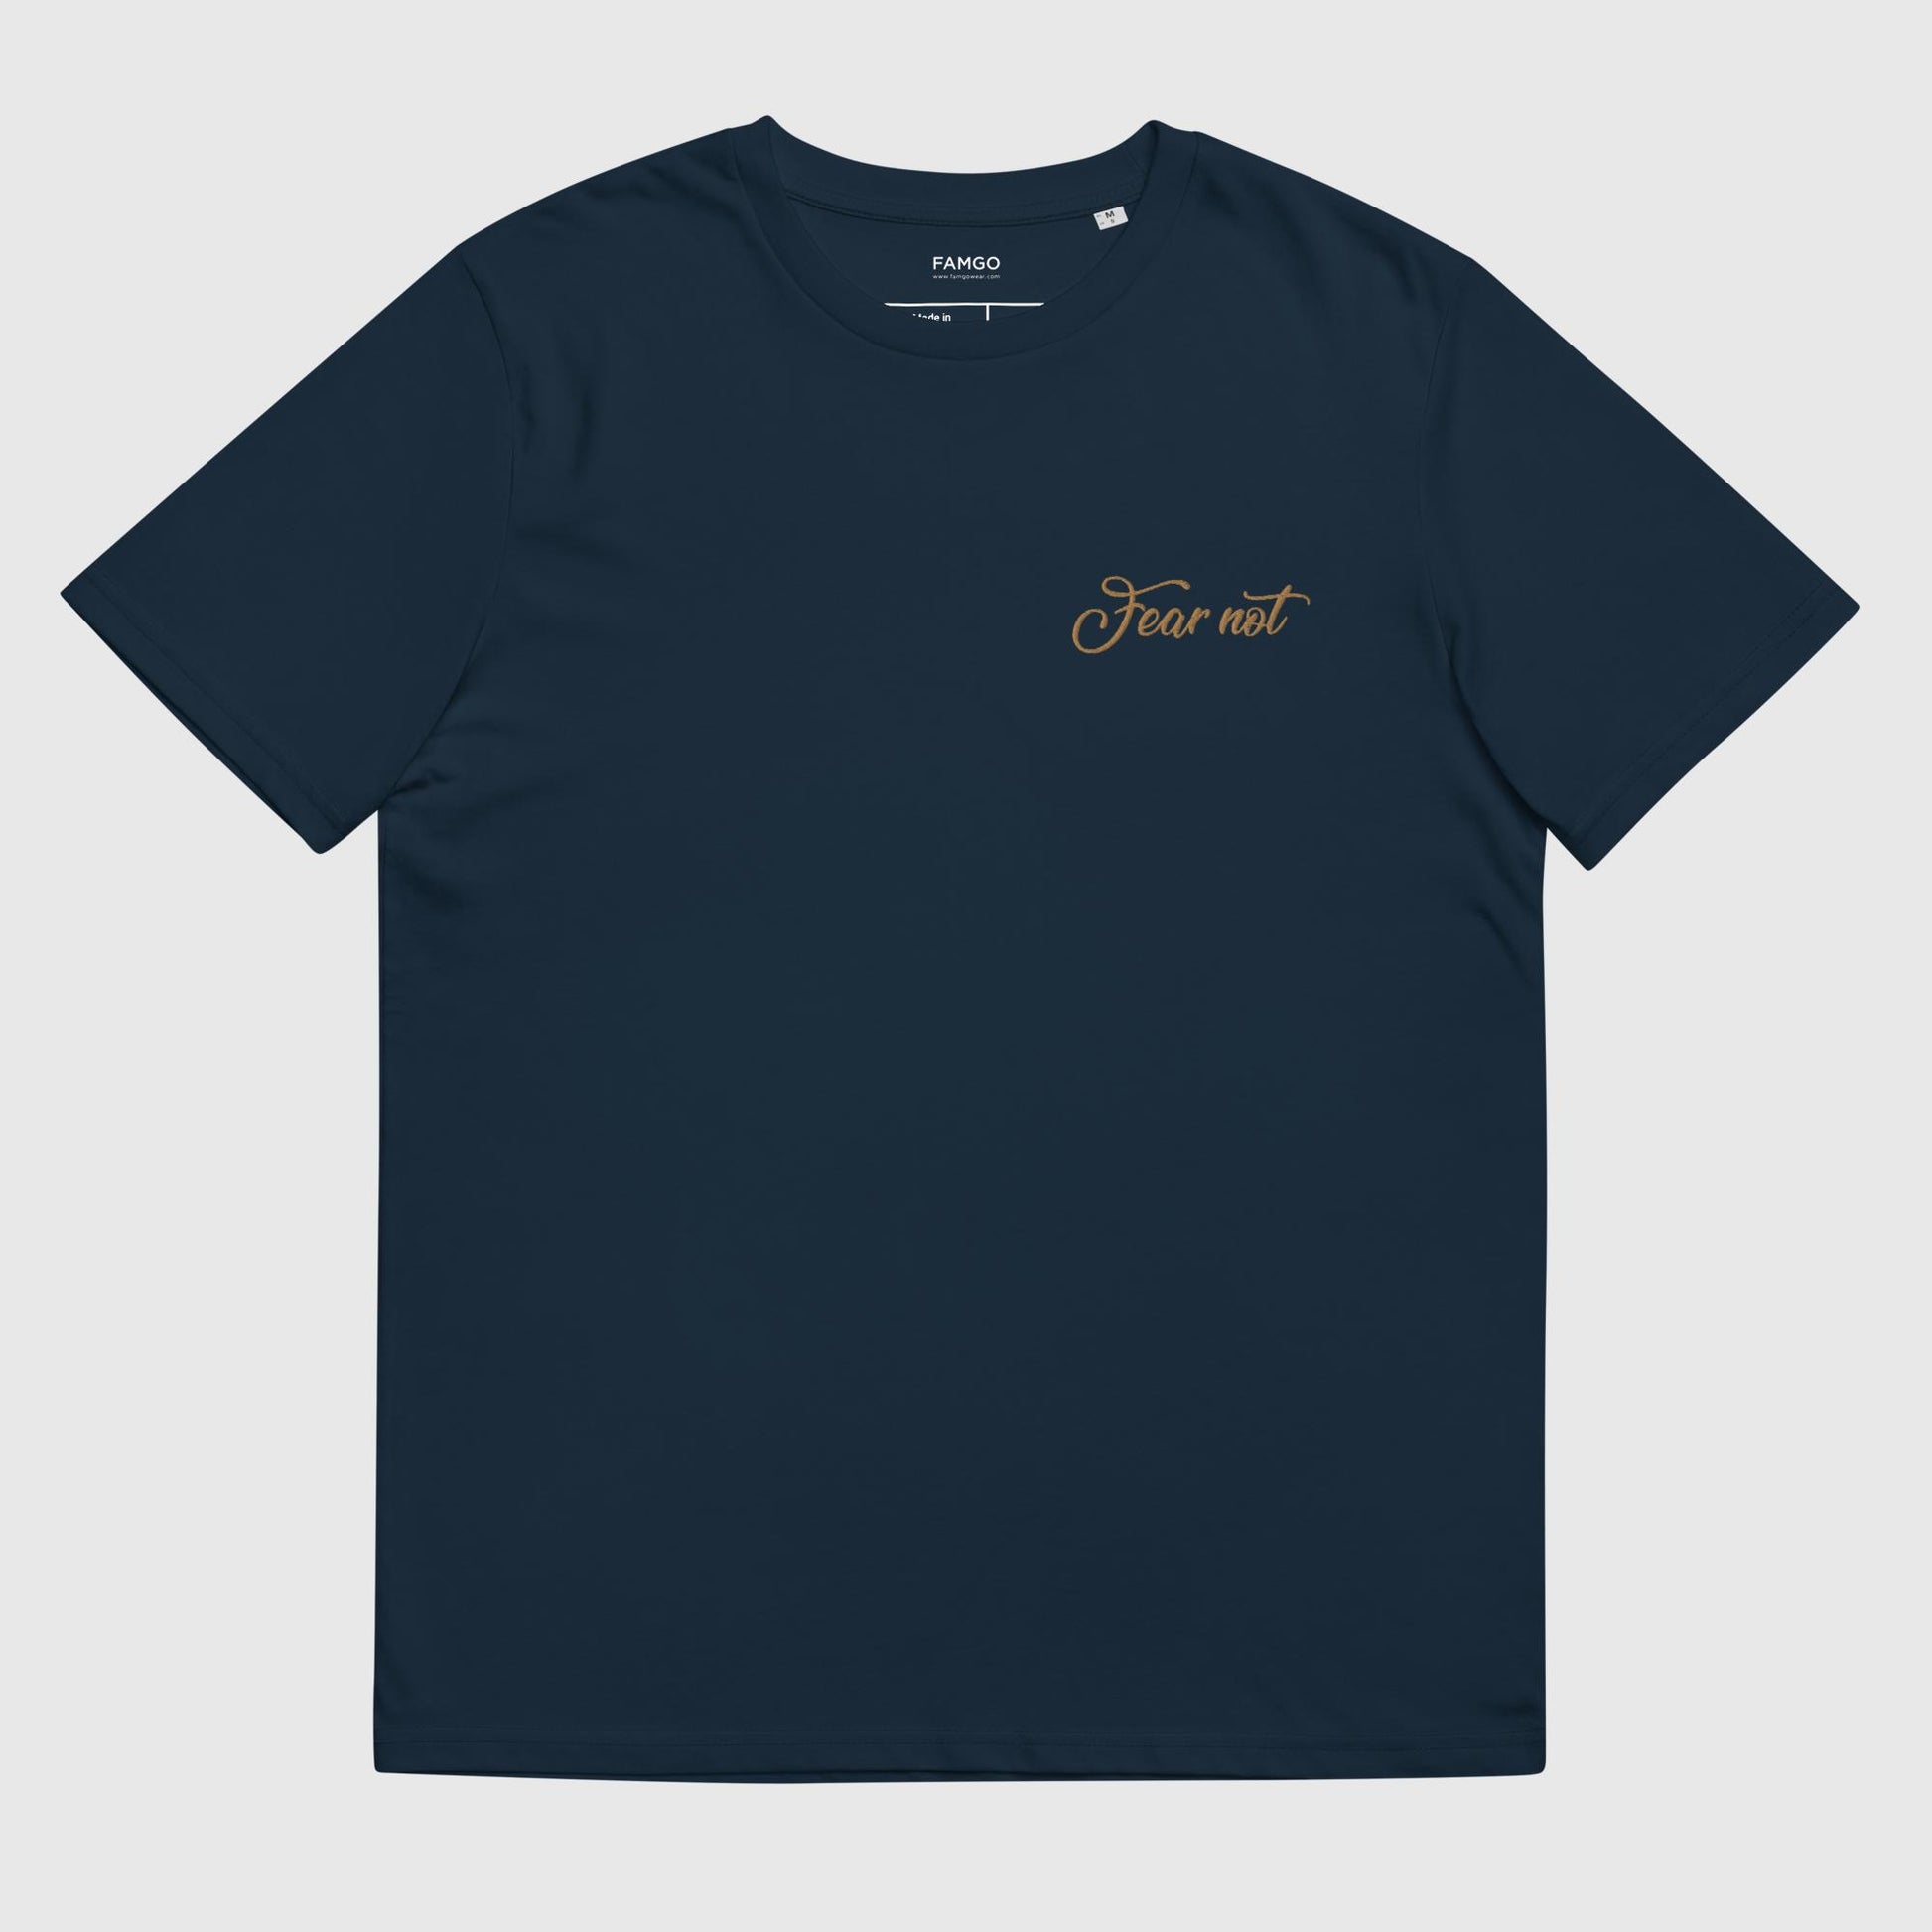 Men's french navy organic cotton t-shirt that features the inspirational quote, "Fear Not."